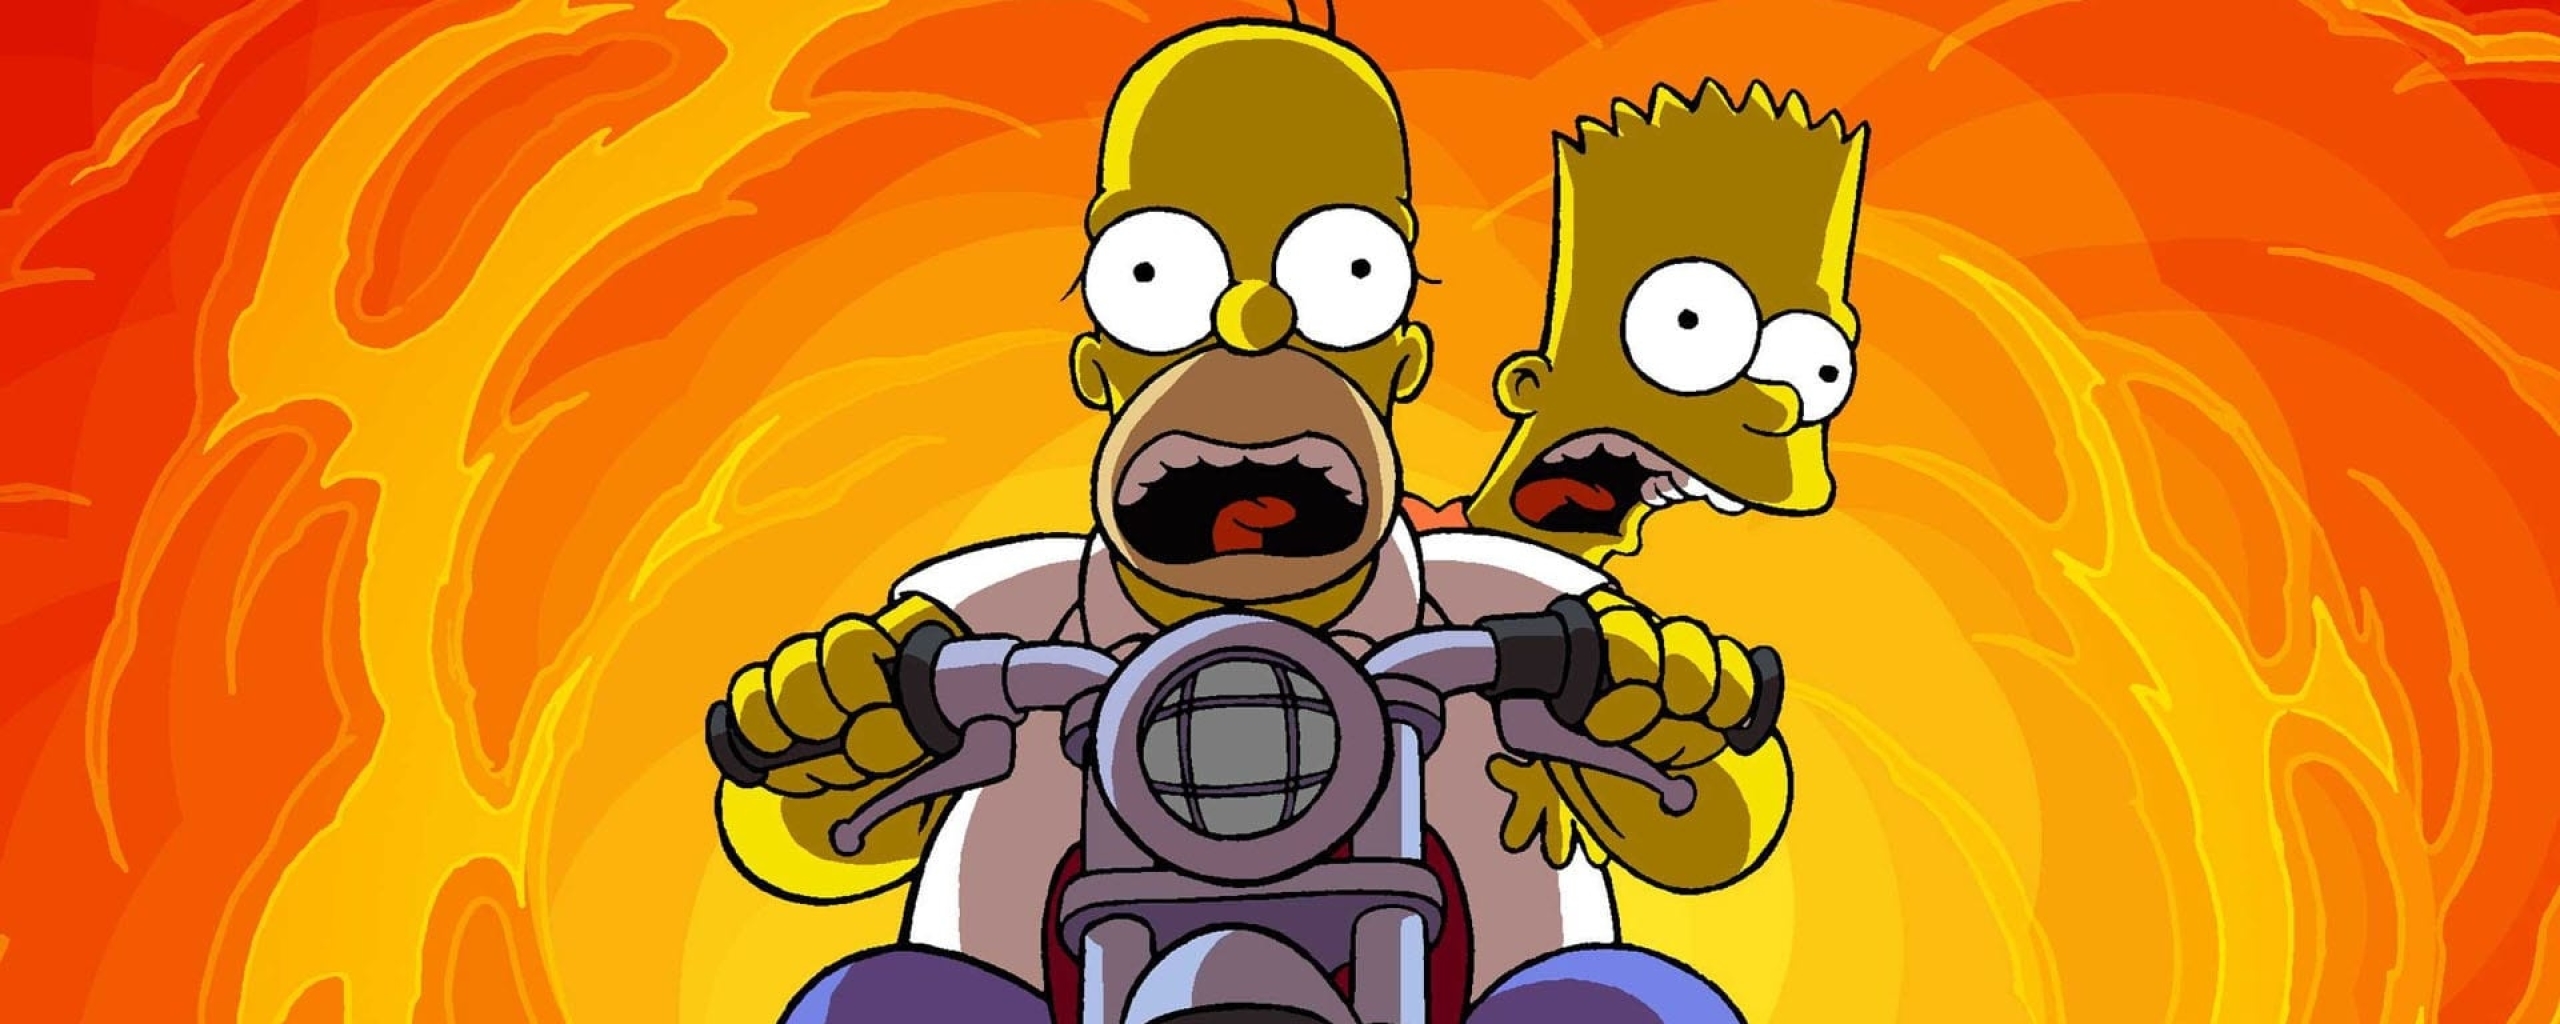 Homer Simpson and Bart Simpson 2560x1024 Resolution Wallpaper, HD TV Series 4K Wallpaper, Image, Photo and Background